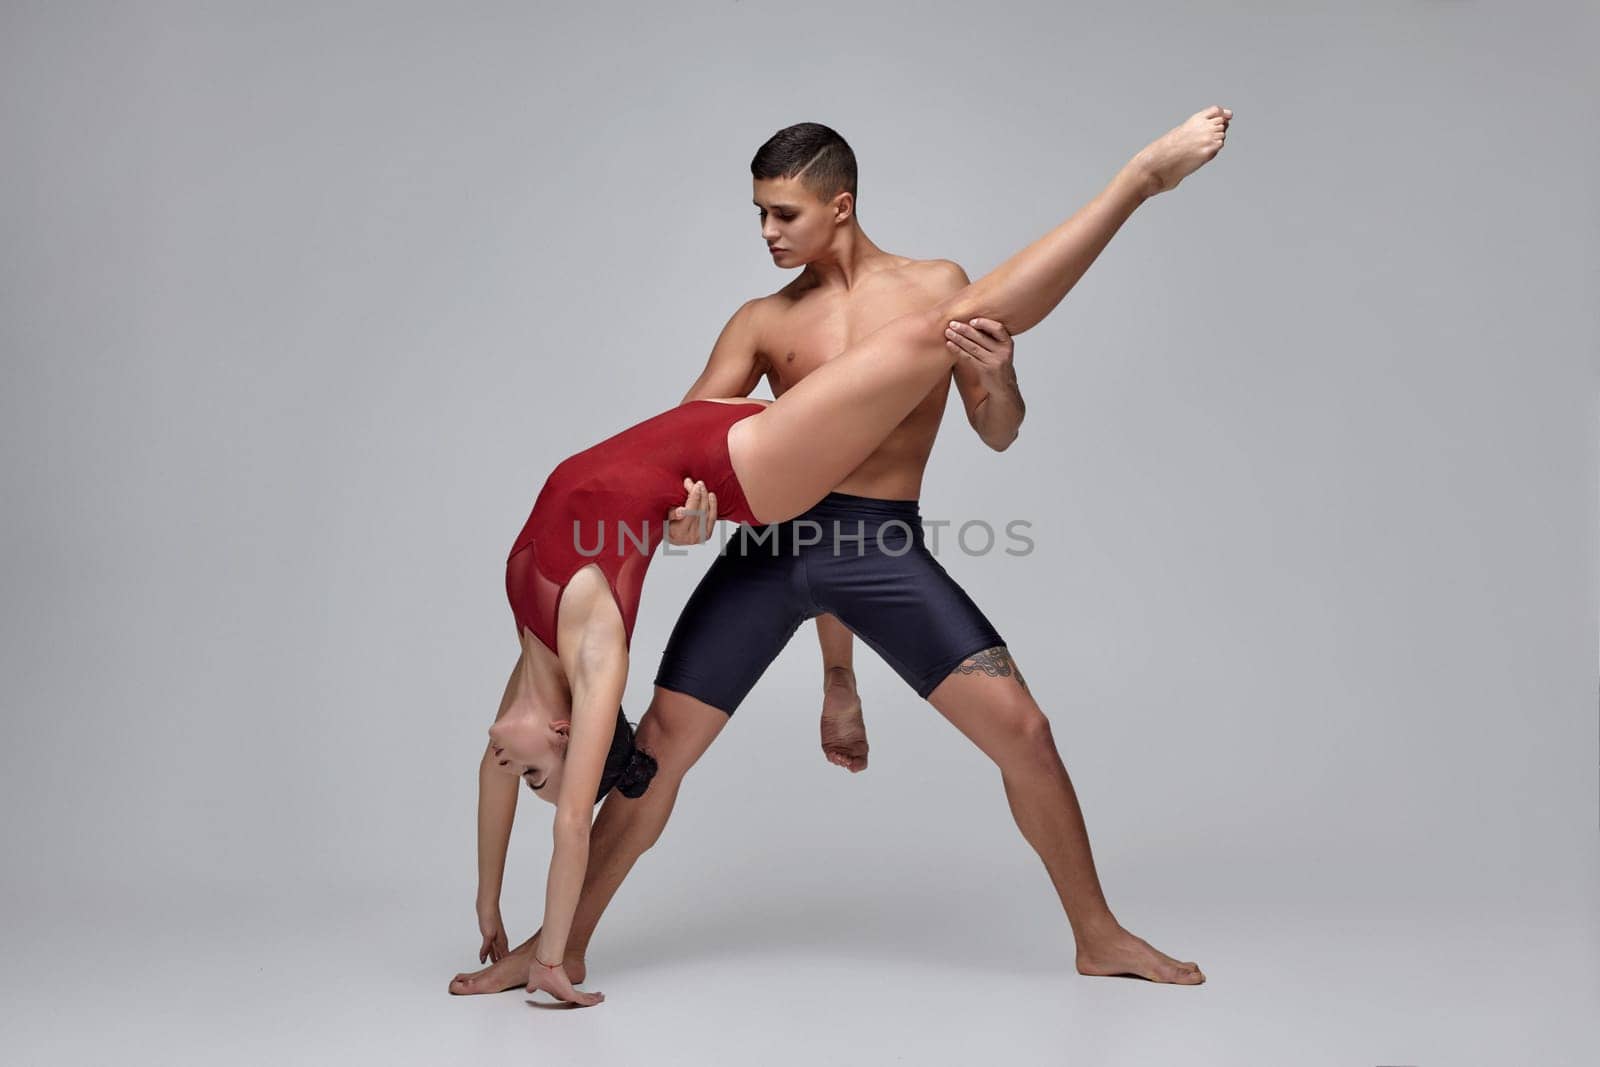 The couple of a wonderful ballet dancers are posing over a gray studio background. Male in black shorts and female in a red swimwear are dancing together. Ballet and contemporary choreography concept. Art photo.